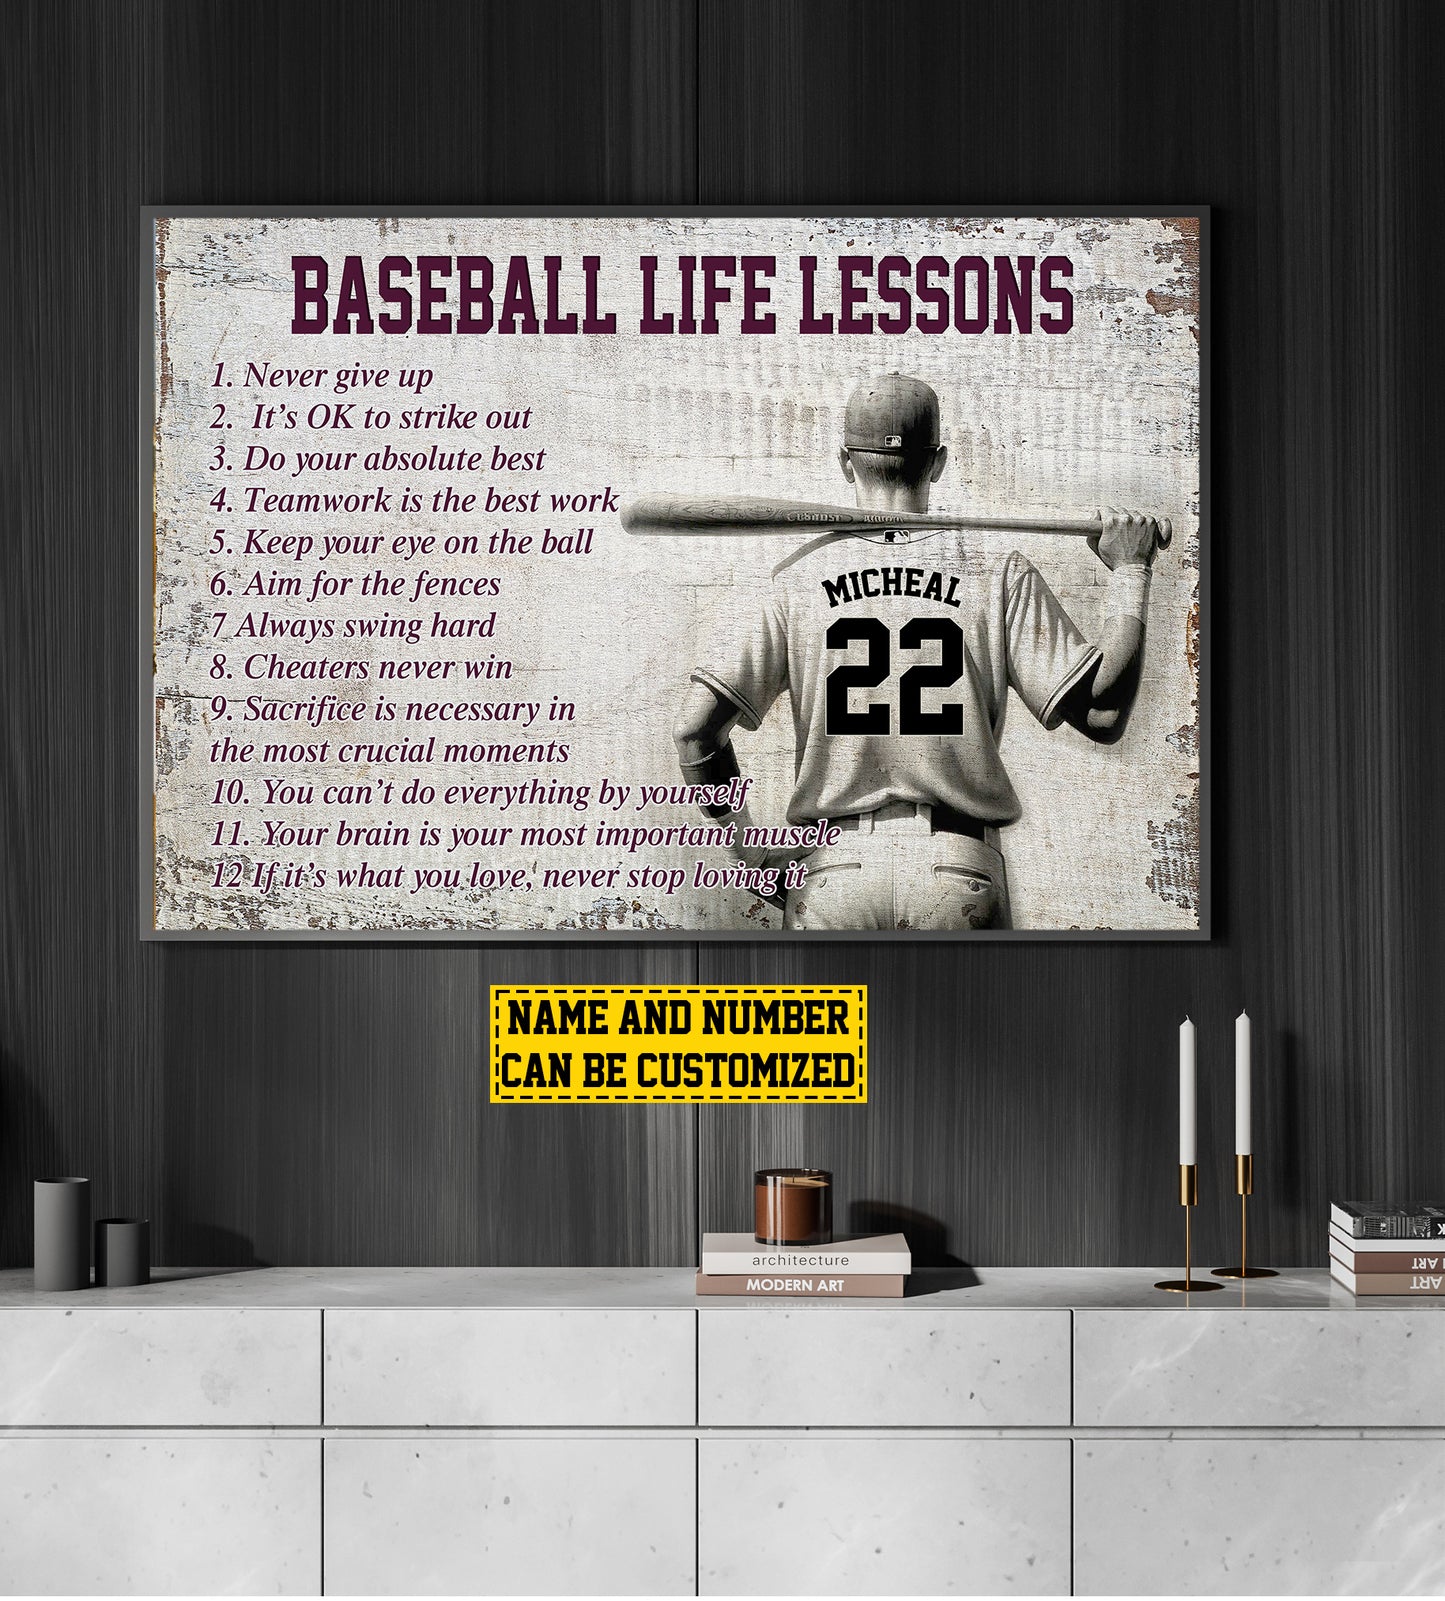 Baseball Life Lessons What You Love Never Stop, Personalized Motivational Baseball Canvas Painting, Inspirational Quotes Wall Art Decor, Poster Gift For Baseball Lovers